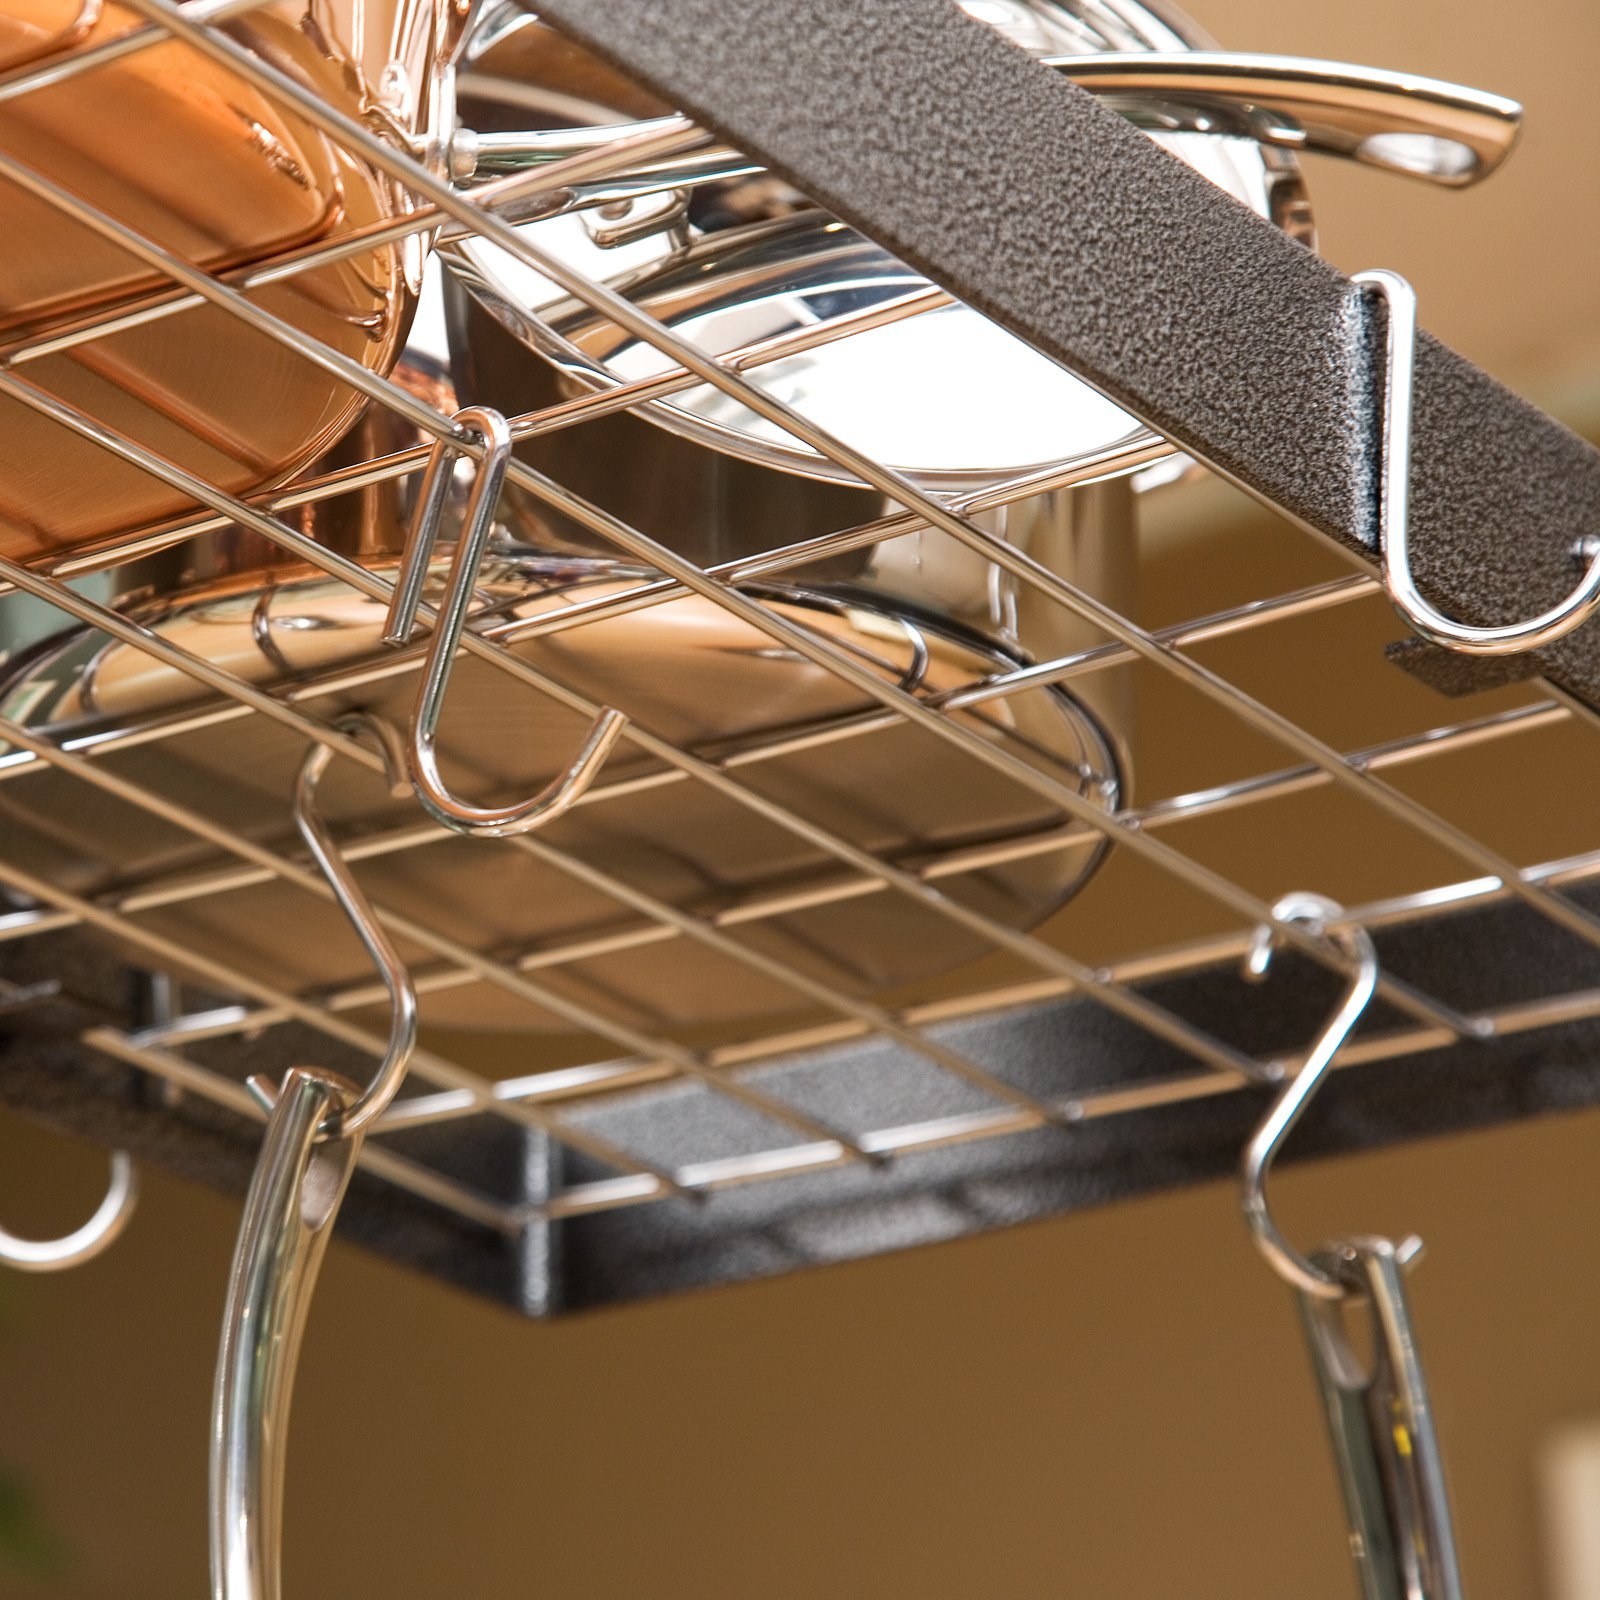 The Gourmet Rectangle Kitchen Pot Rack with Grid - image 2 of 8